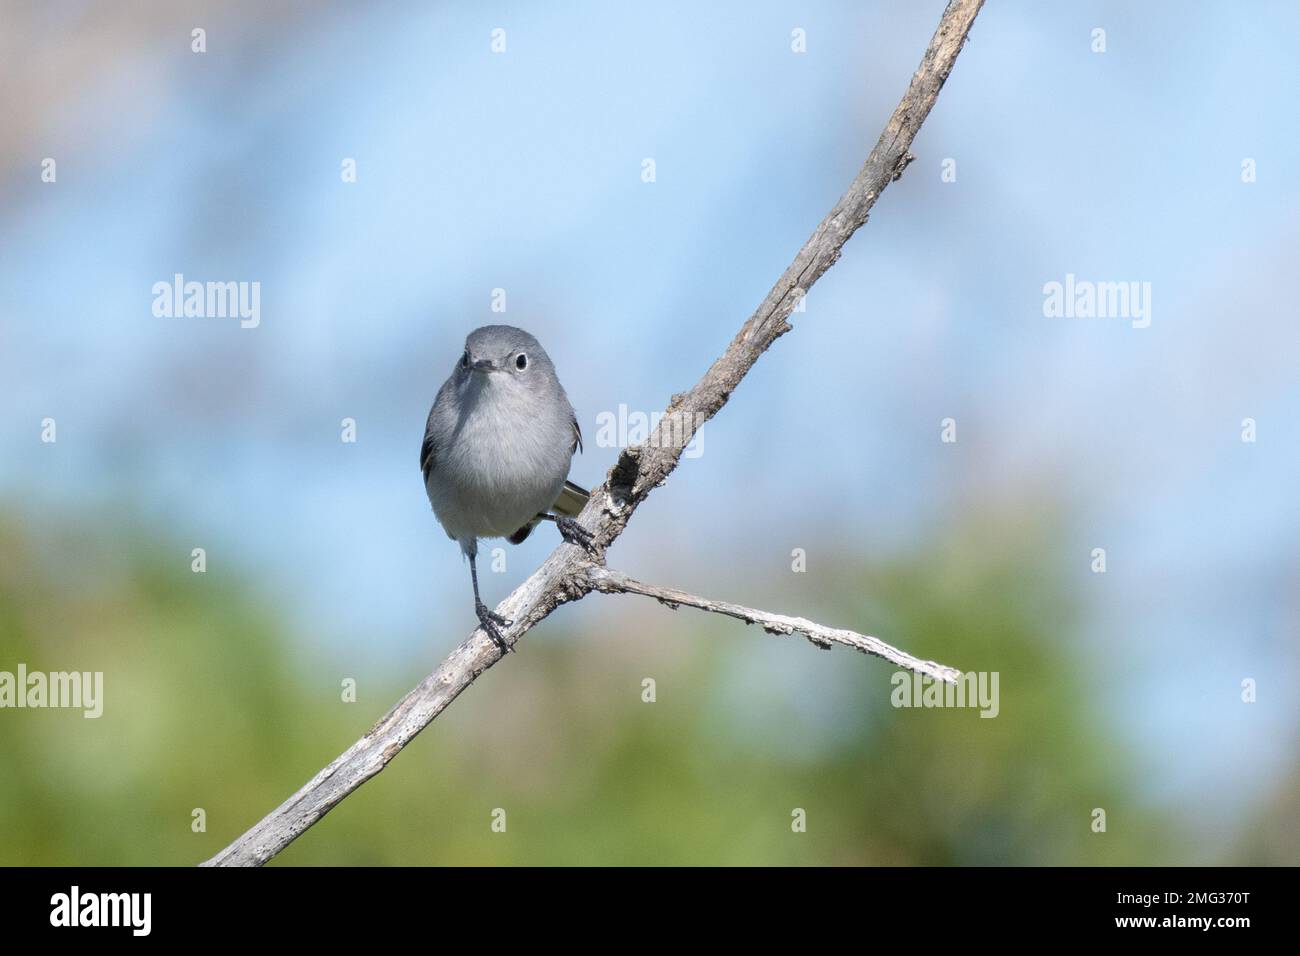 Bluegray gnatcatcher bird maintains firm grip on tree branch perch while remaining alert. Stock Photo